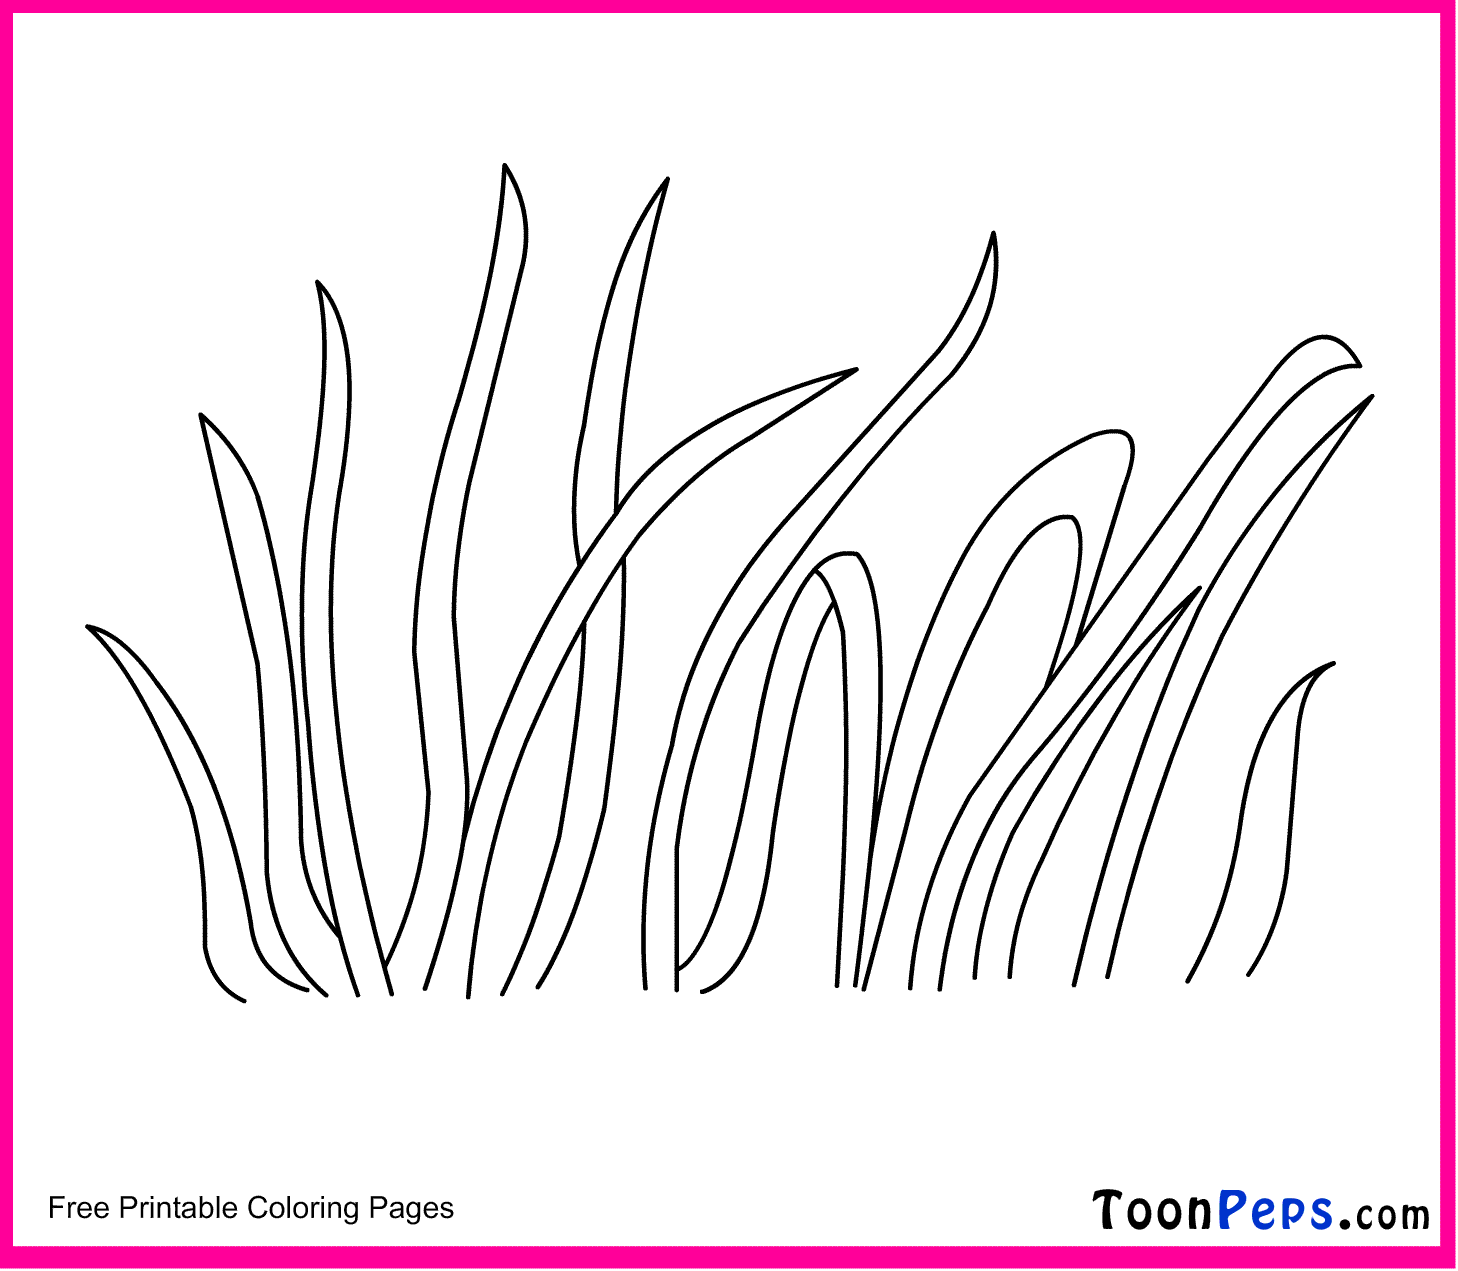 Grass - Free Colouring Pages